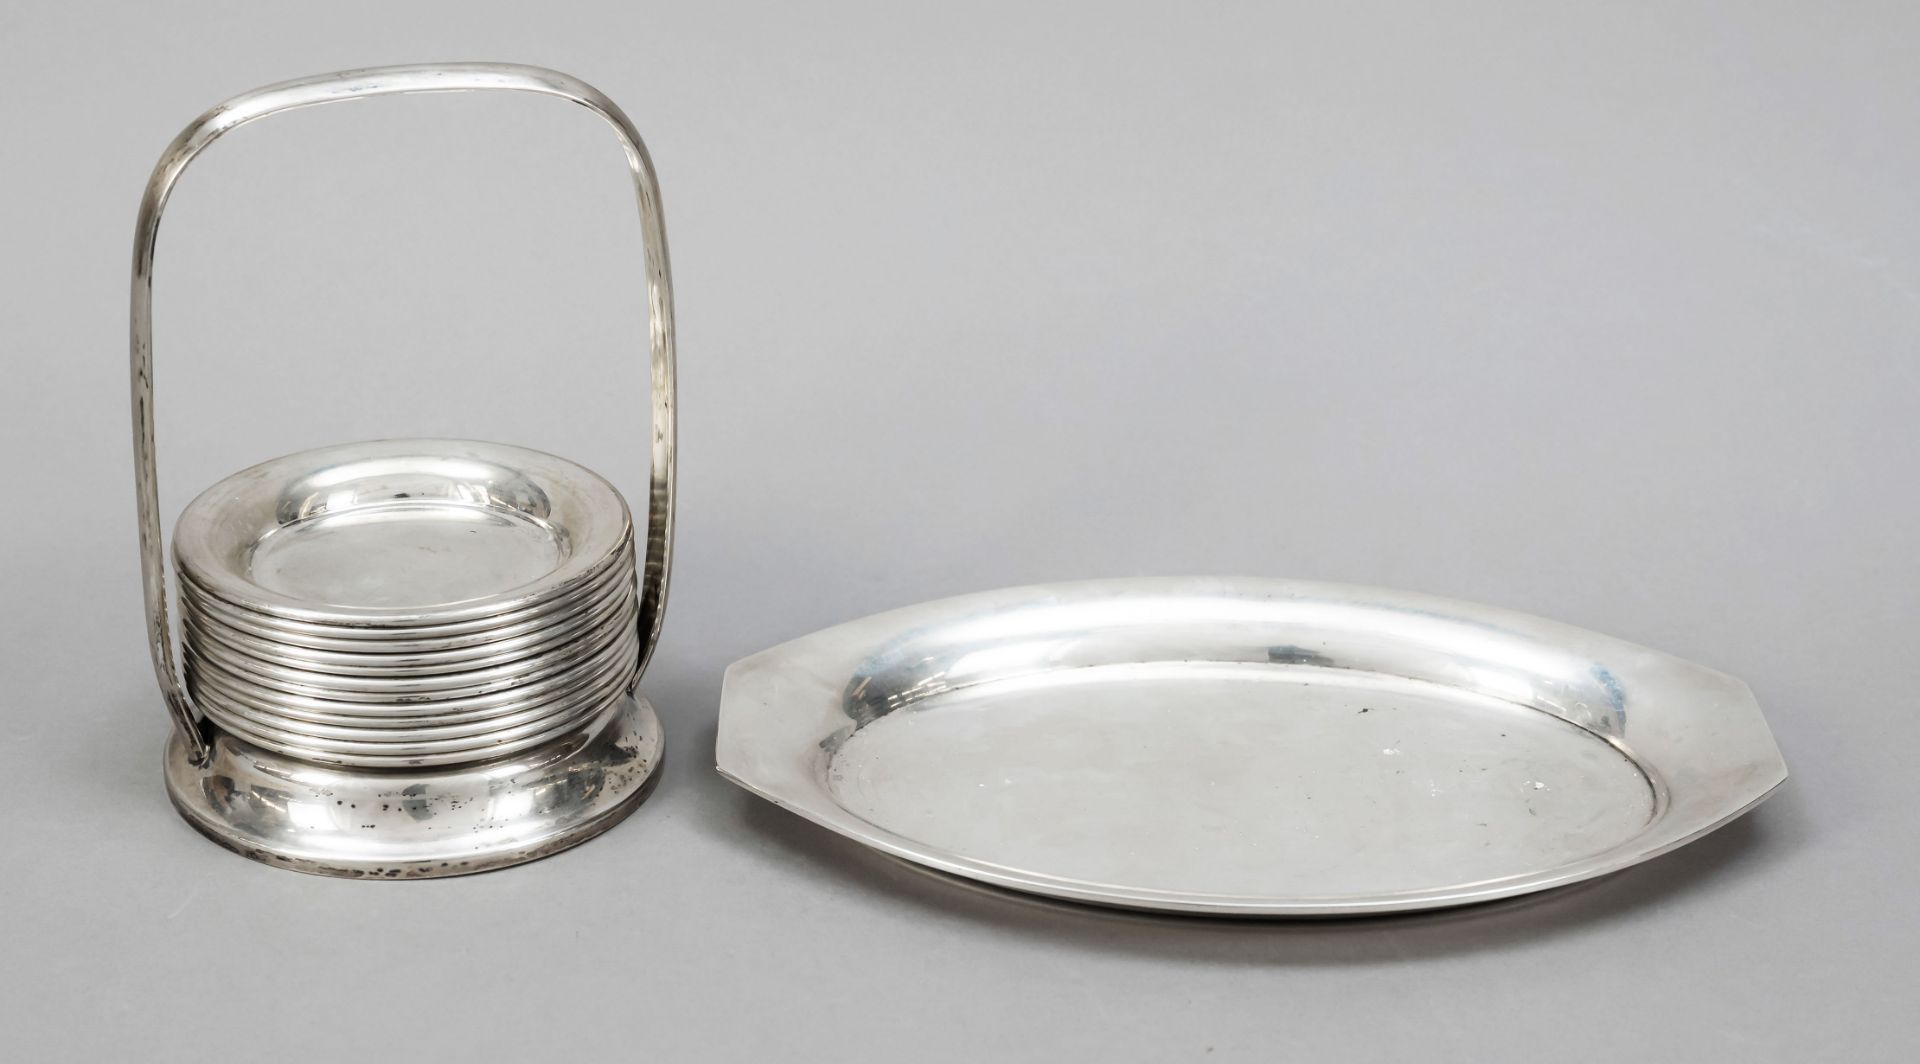 Twelve coasters in stand, Austria, 20th c., silver 800/000, smooth form, stand with overlapping